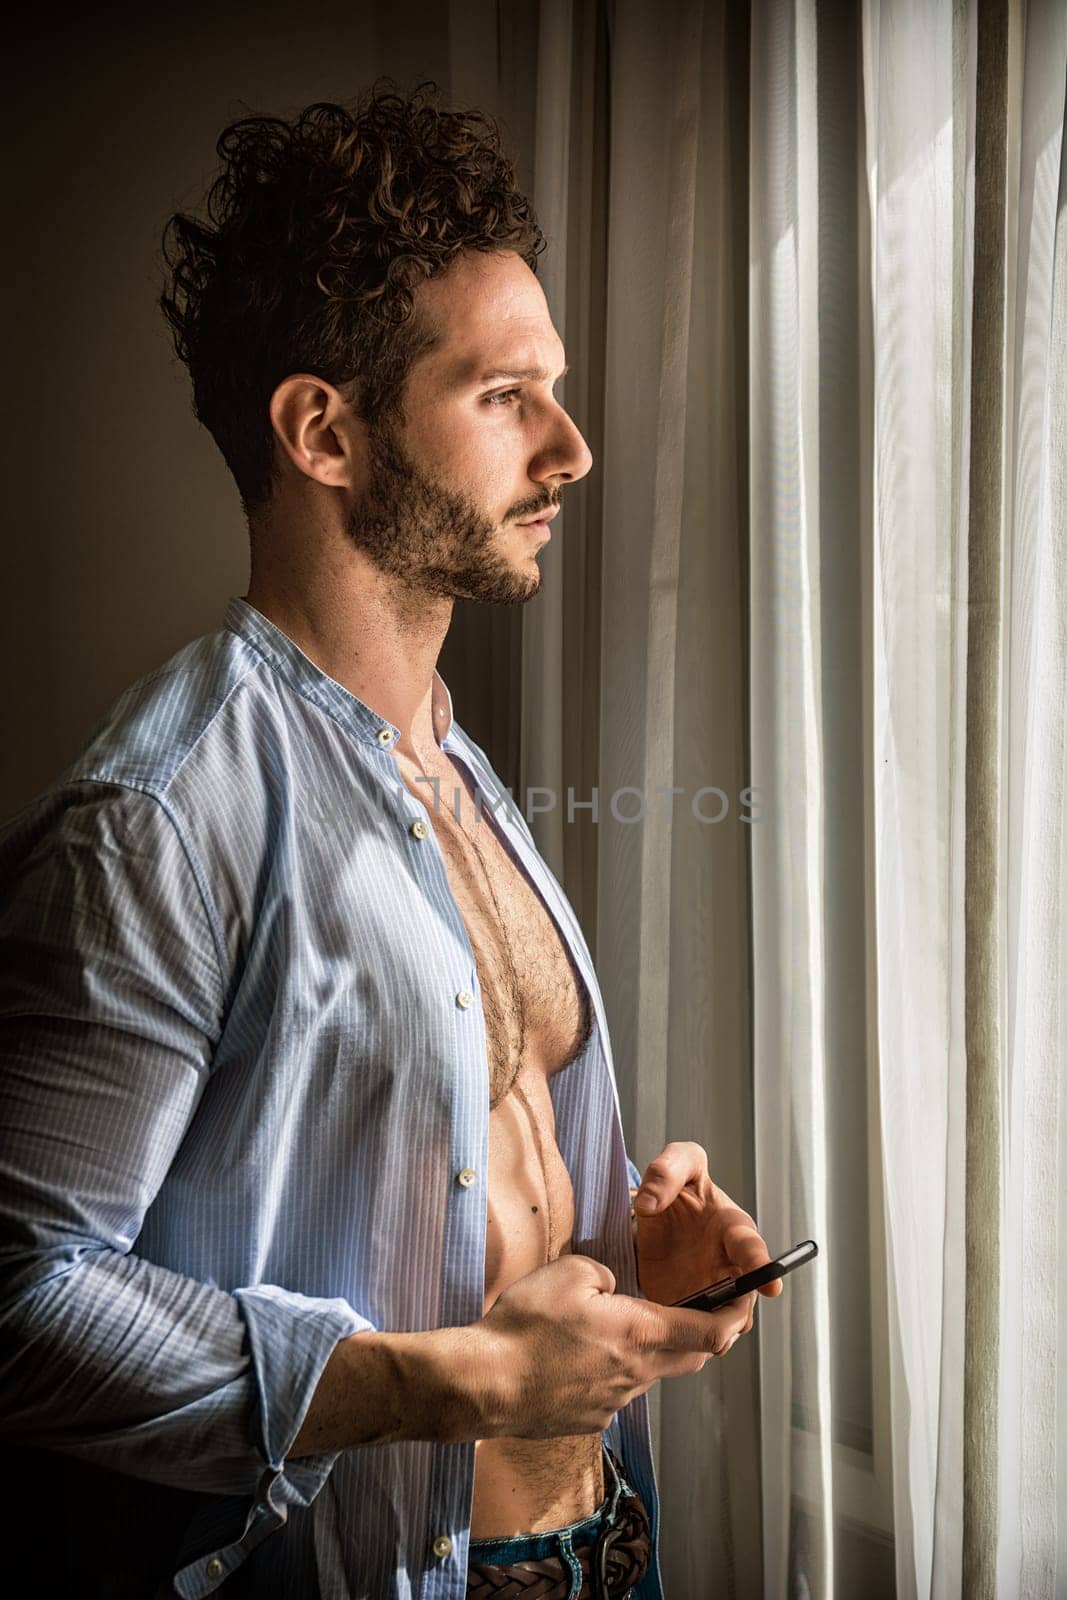 A man standing in front of a window holding a cell phone. A Captivating View: A Muscular Man Captivated by His Cell Phone